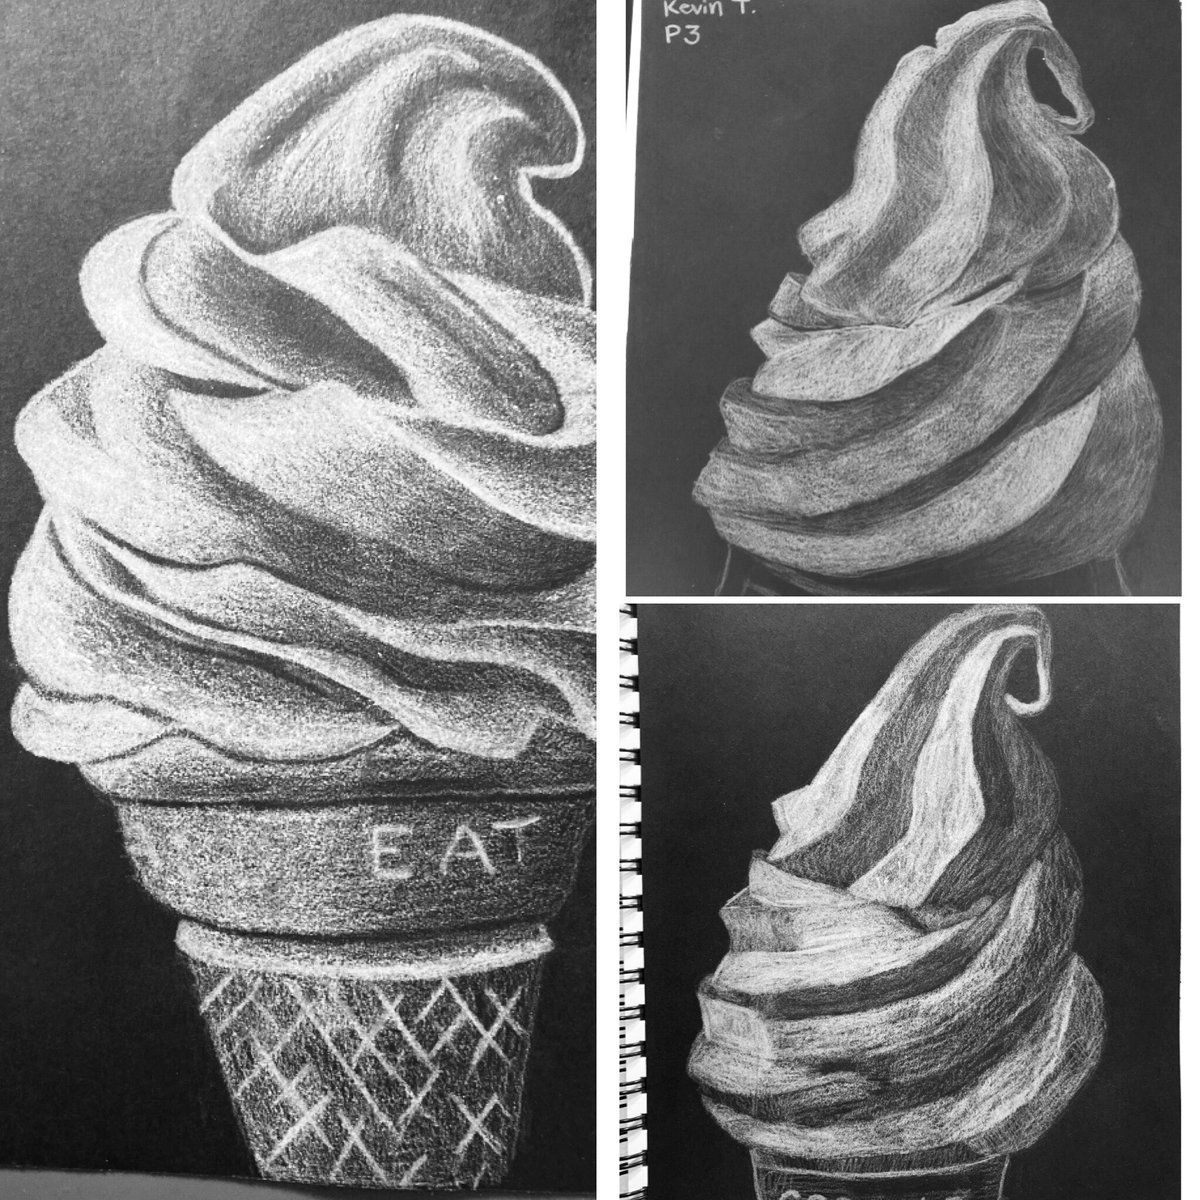 Western Hs Draw Paint Class Delicious Ice Cream Drawings From Jane Julibeth And Kevin Students Observed Reverse Values And Used White Color Pencil On Black Paper Likeapio Piopress Auhsdvapa Mrstfoxresourc1 T Co Qhh4ccin1o